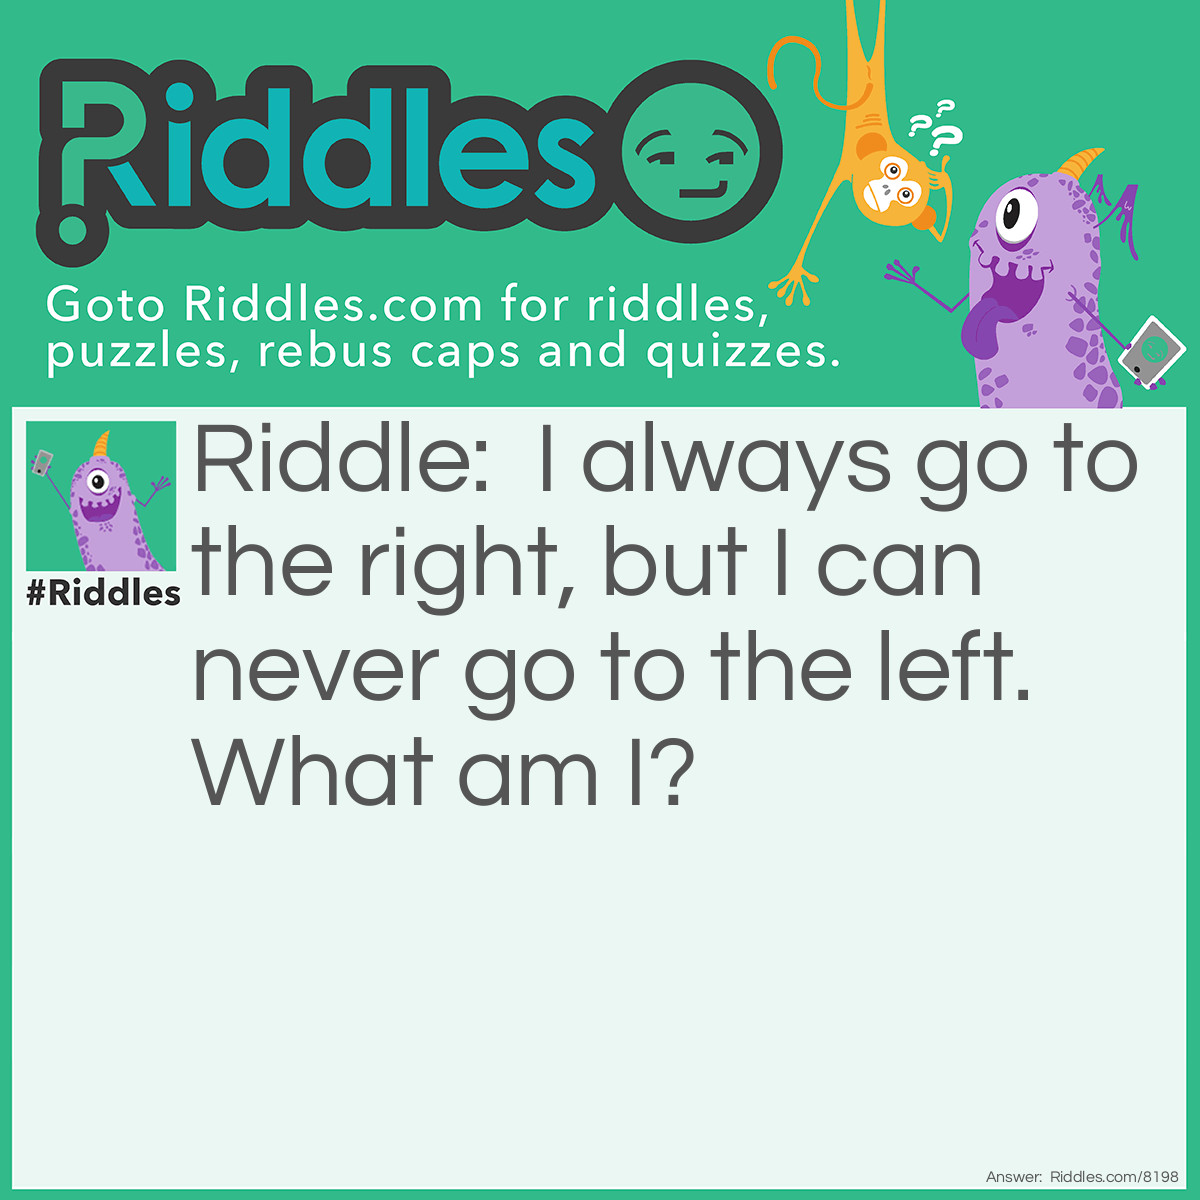 Riddle: I always go to the right, but I can never go to the left. What am I? Answer: Hands on a clock.